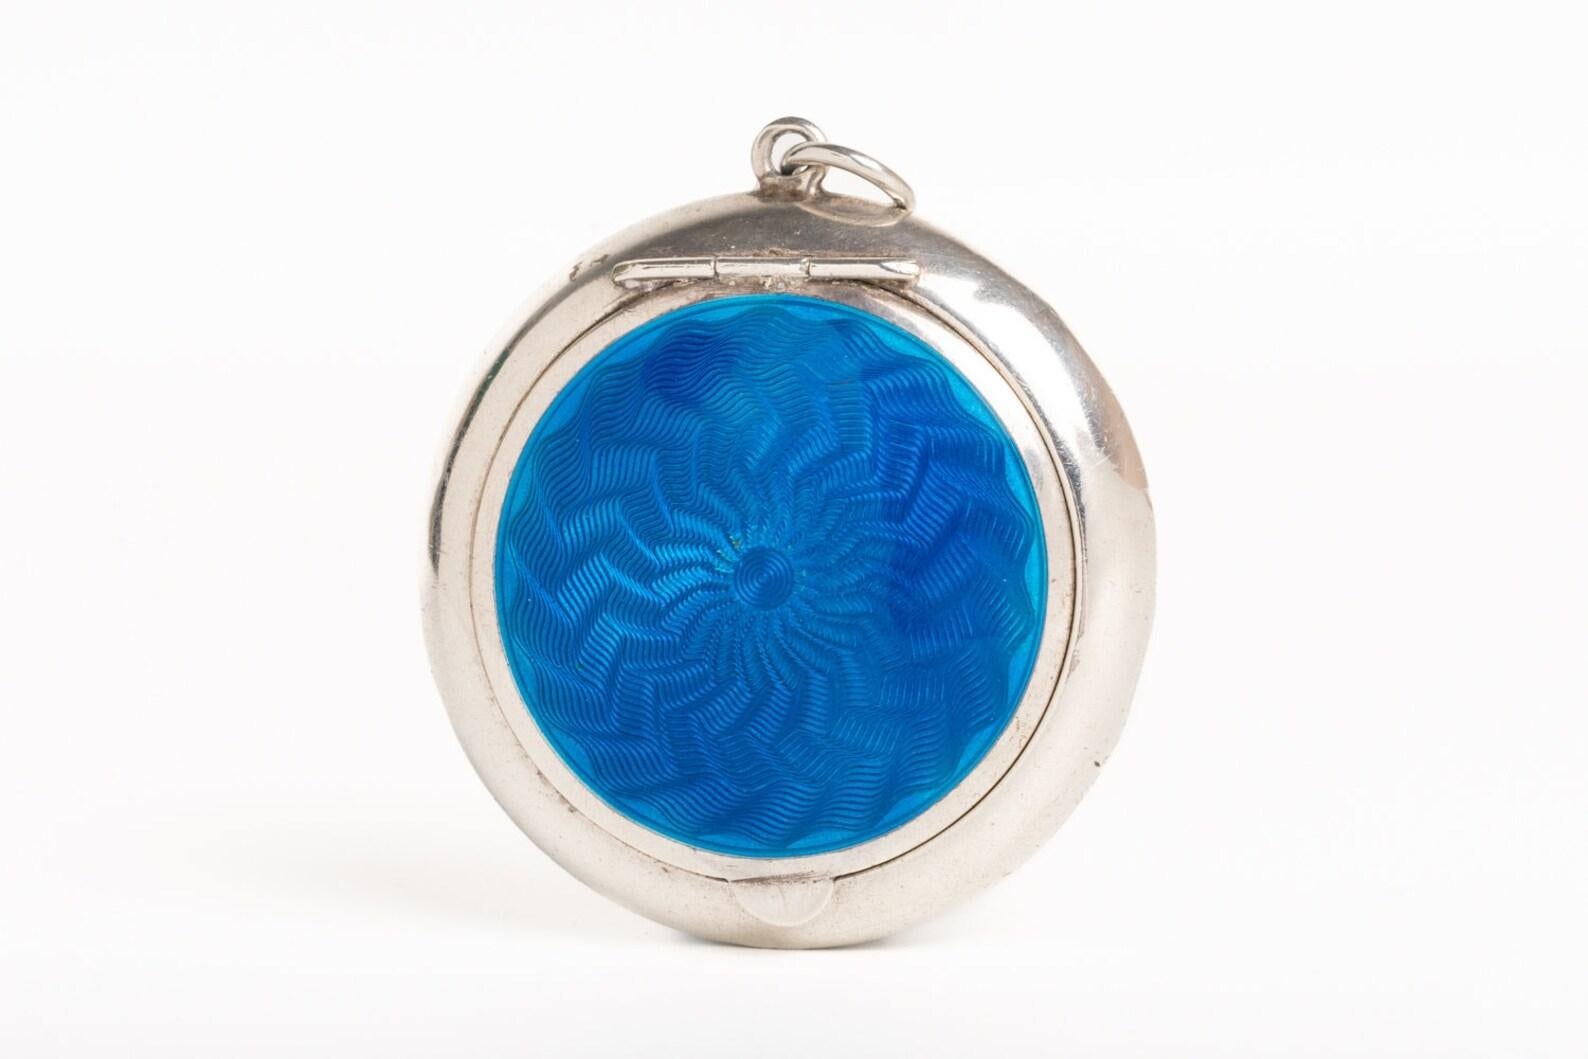 This stunning Art Deco 1930's blue guilloche enamel and silver gilt mirror compact/pendant is made by well known Birmingham jewellers: Crisford and Norris. The front cover of this beautiful piece is decorated in a blue guilloche enamel with a